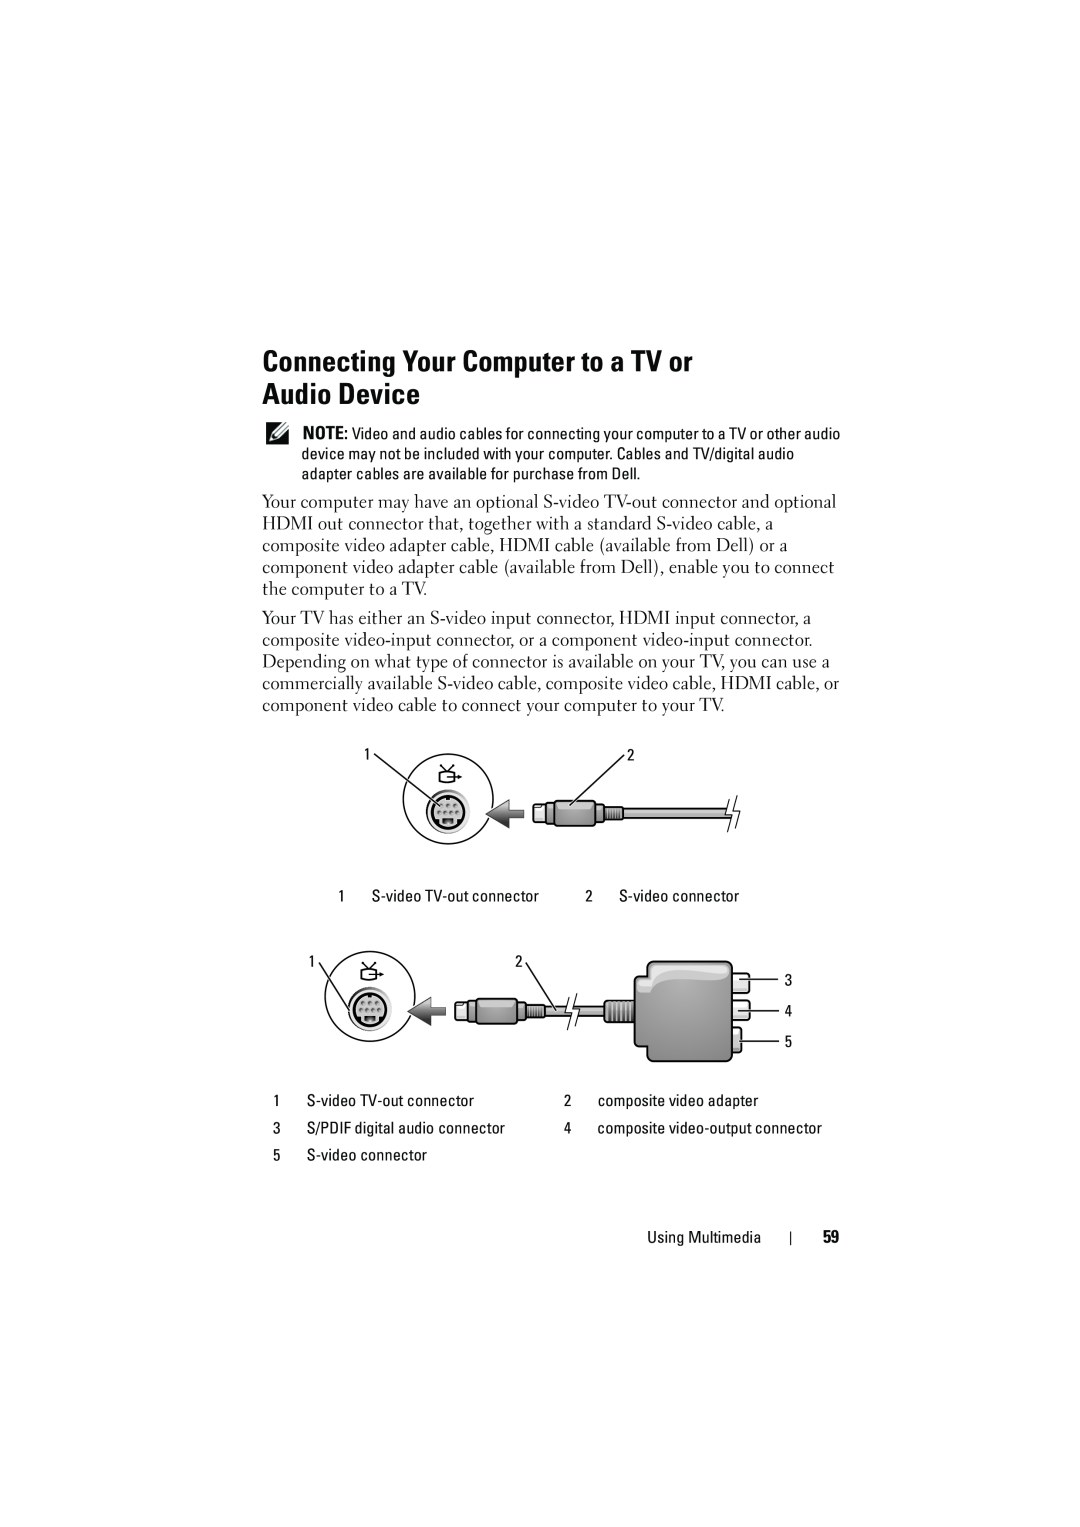 Dell 1526, 1525 owner manual Connecting Your Computer to a TV or Audio Device, composite video-output connector 